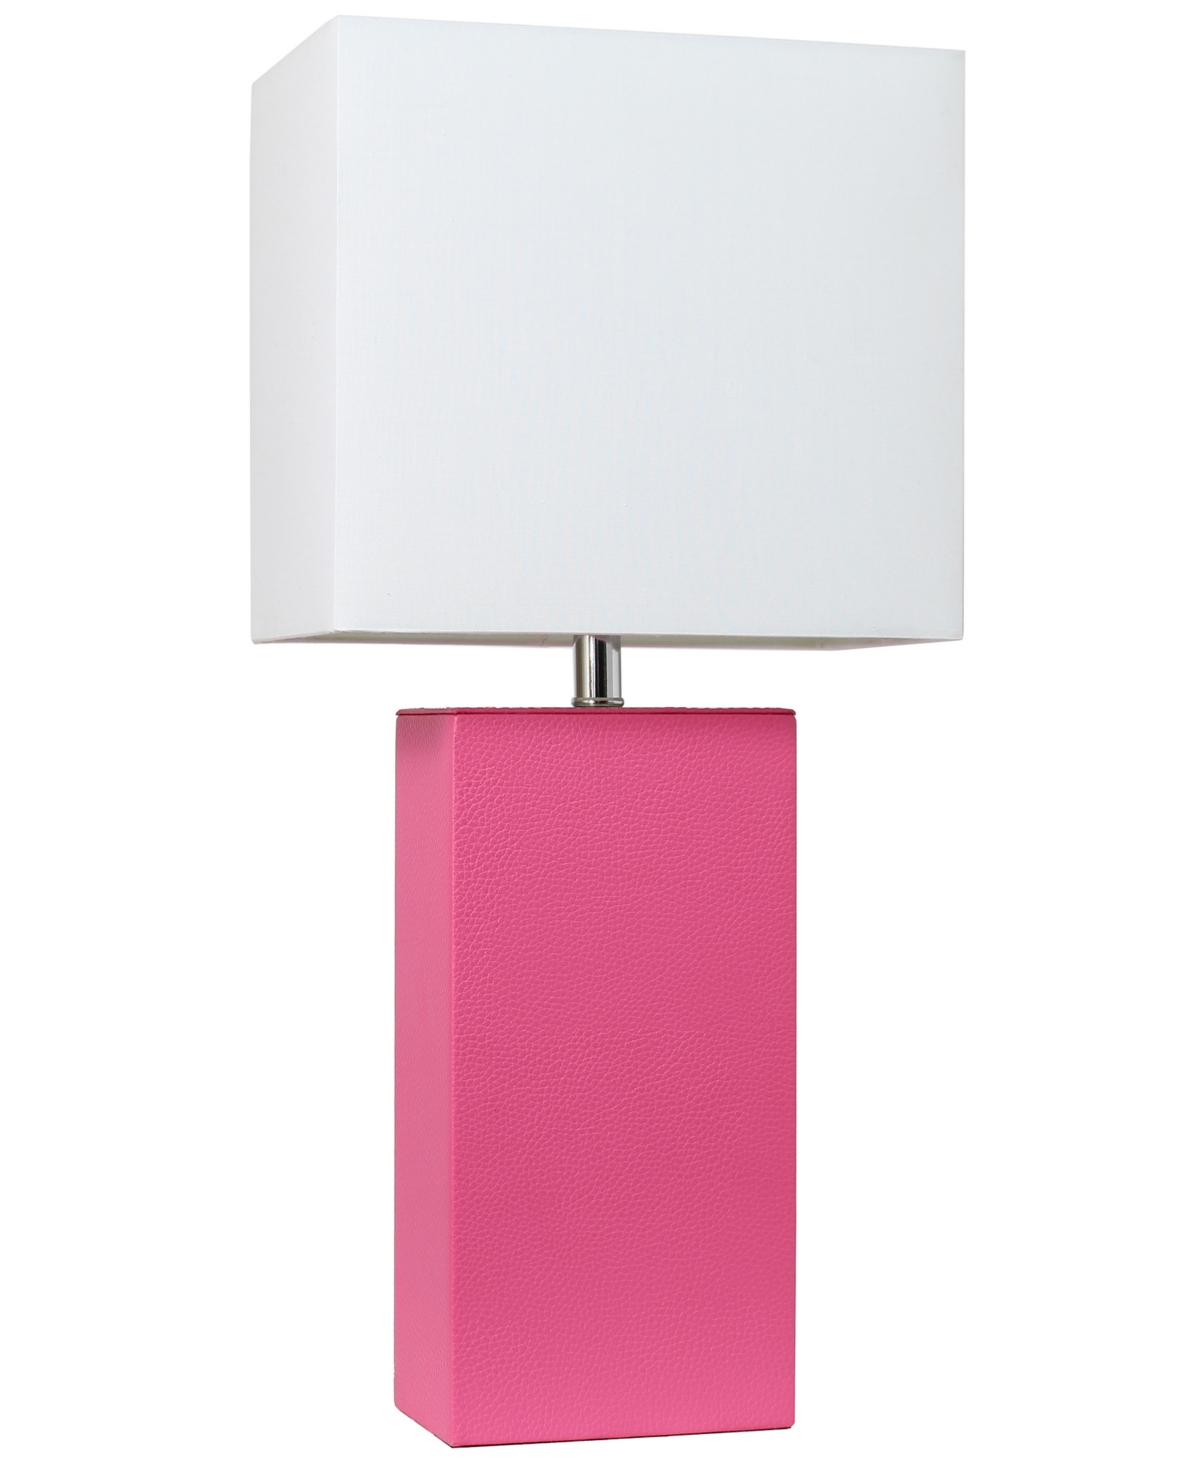 All The Rages Lalia Home Lexington 21" Leather Base Modern Home Decor Bedside Table Lamp With White Rectangular Fa In Hot Pink